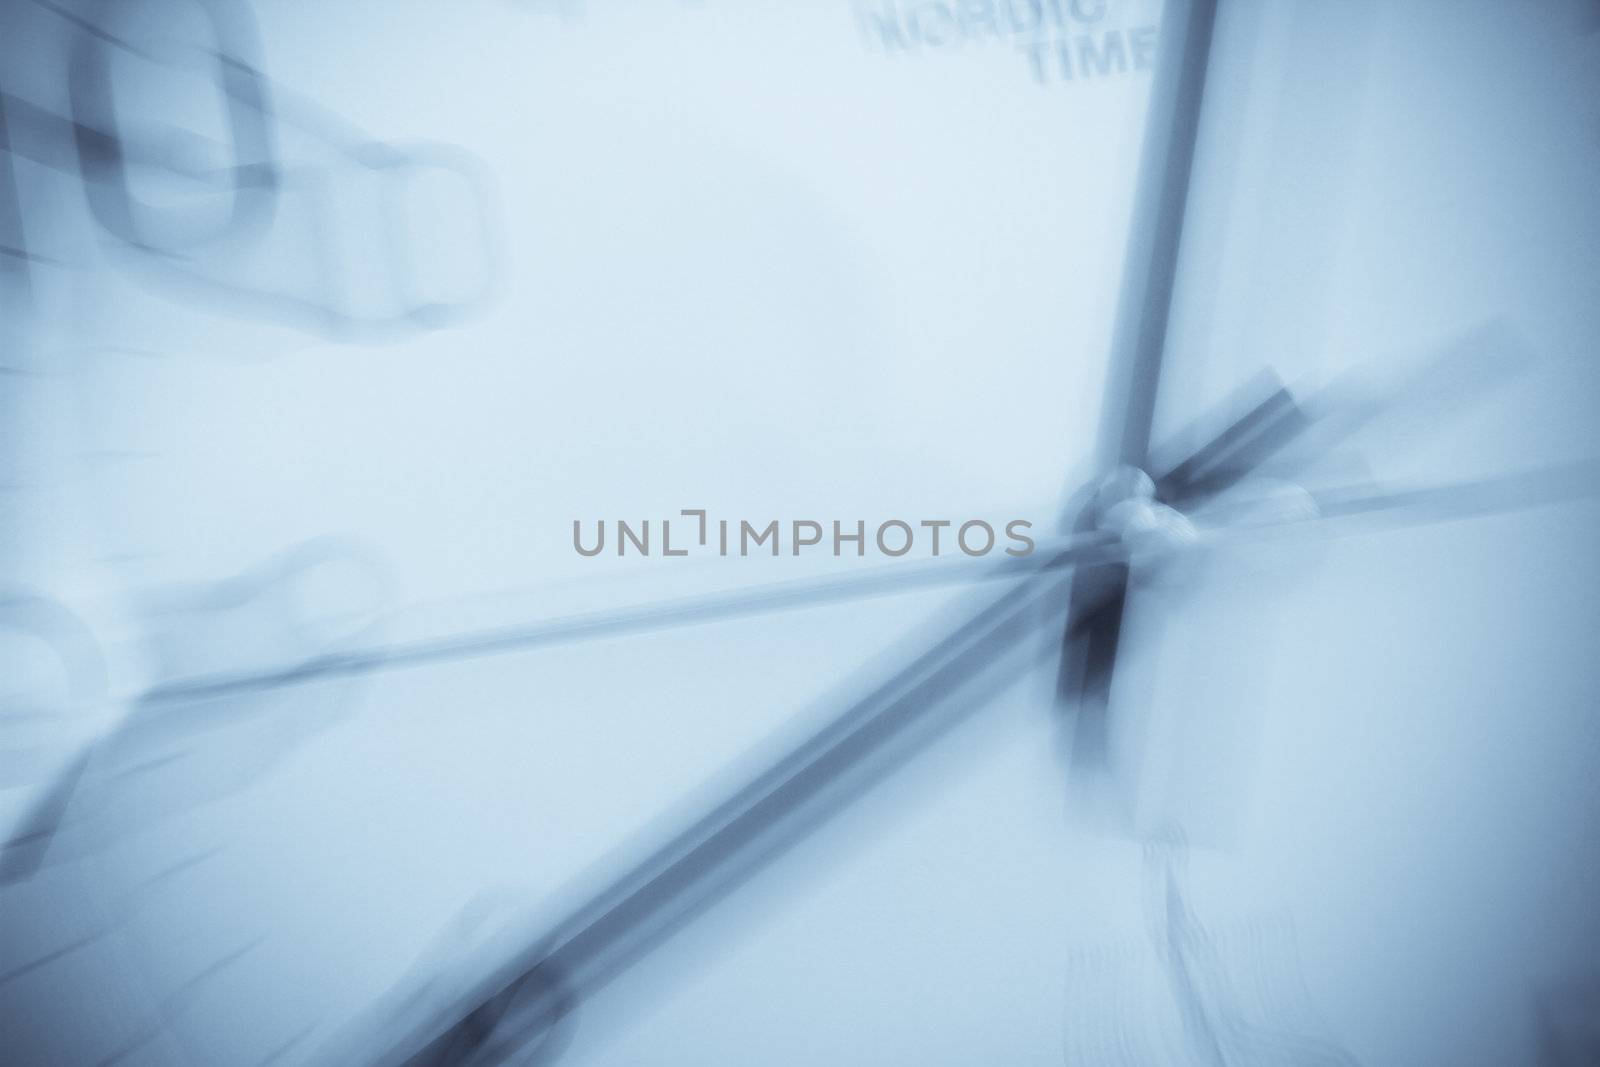 A closeup of a clock, blurred out for effect.